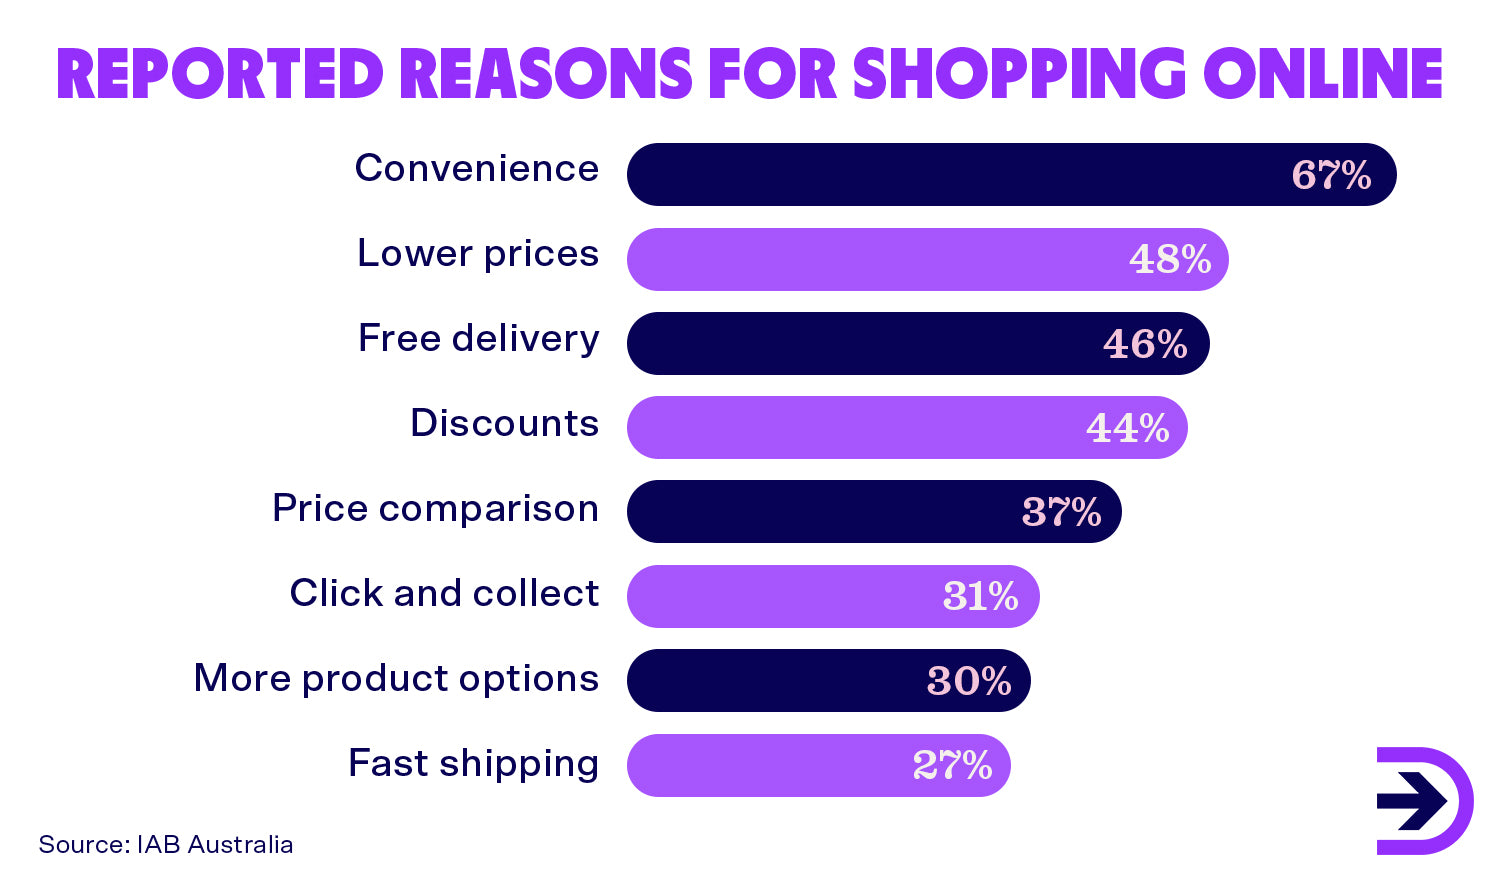 Convenience was reported as the top reason why shoppers opt for an online experience.